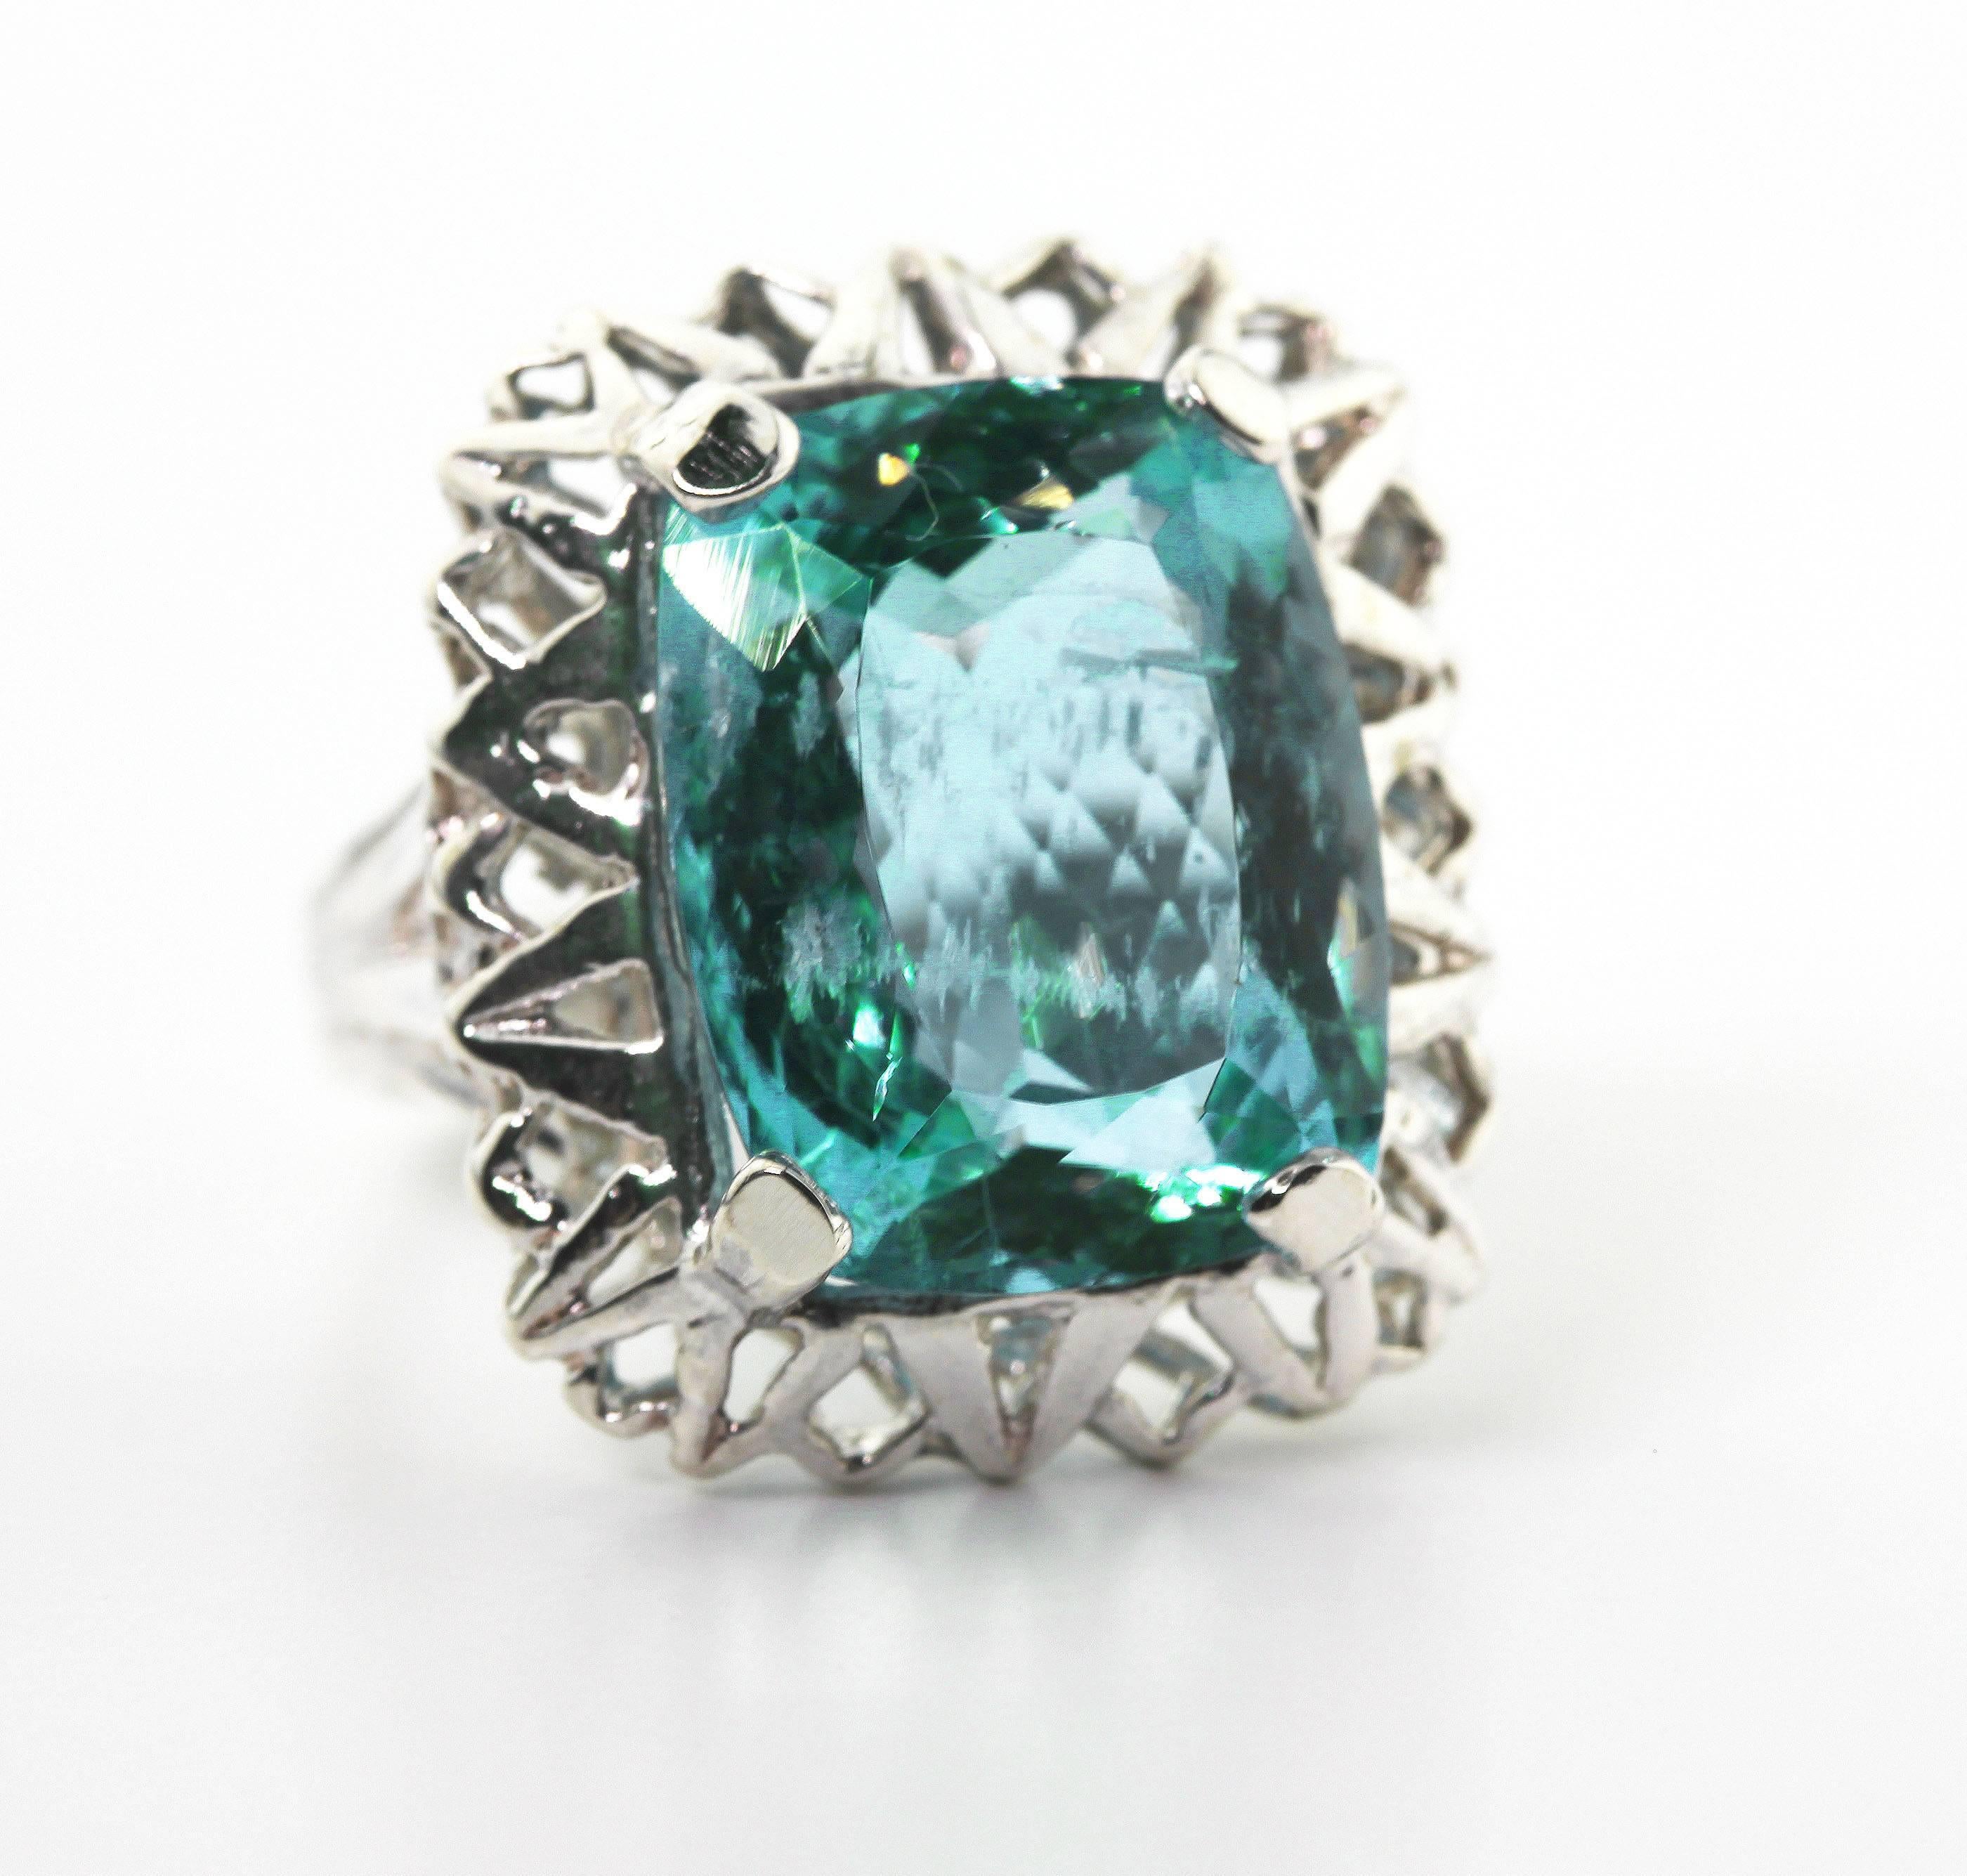 Super brilliant glittering 8.25 carat Aquamarine (14.88 mm x 11.6 mm) set in a sterling silver ring size 5 (sizable).    More from this seller by putting gemjunky into 1stdibs search bar.